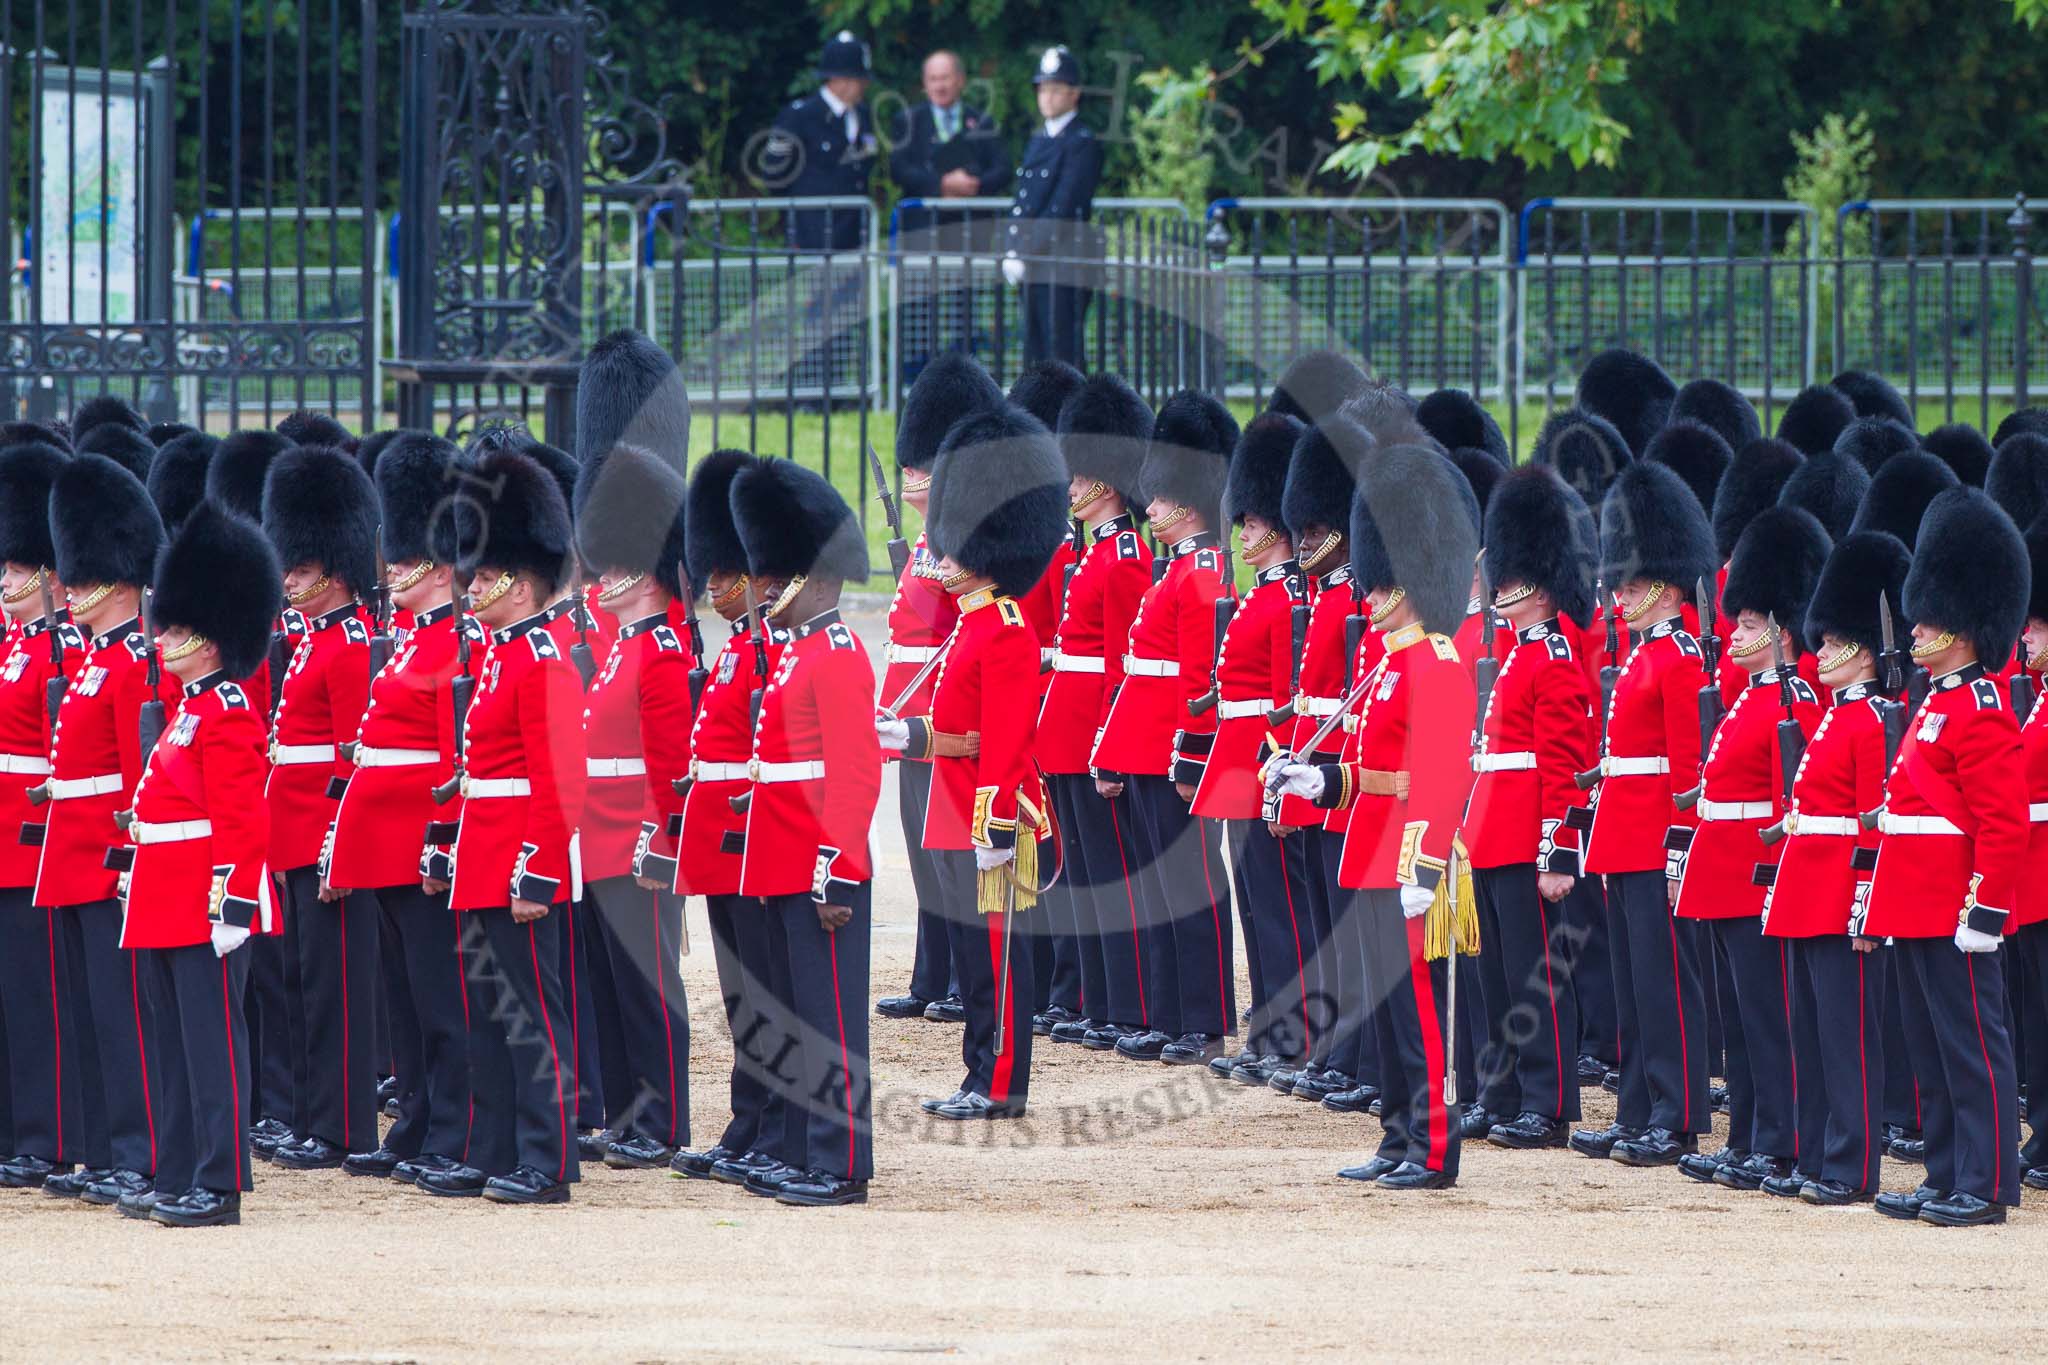 Trooping the Colour 2012: No. 5 Guard, 1st Battalion Irish Guards, and No. 6 Guard, F Company Scots Guards, ready to march off..
Horse Guards Parade, Westminster,
London SW1,

United Kingdom,
on 16 June 2012 at 12:09, image #647